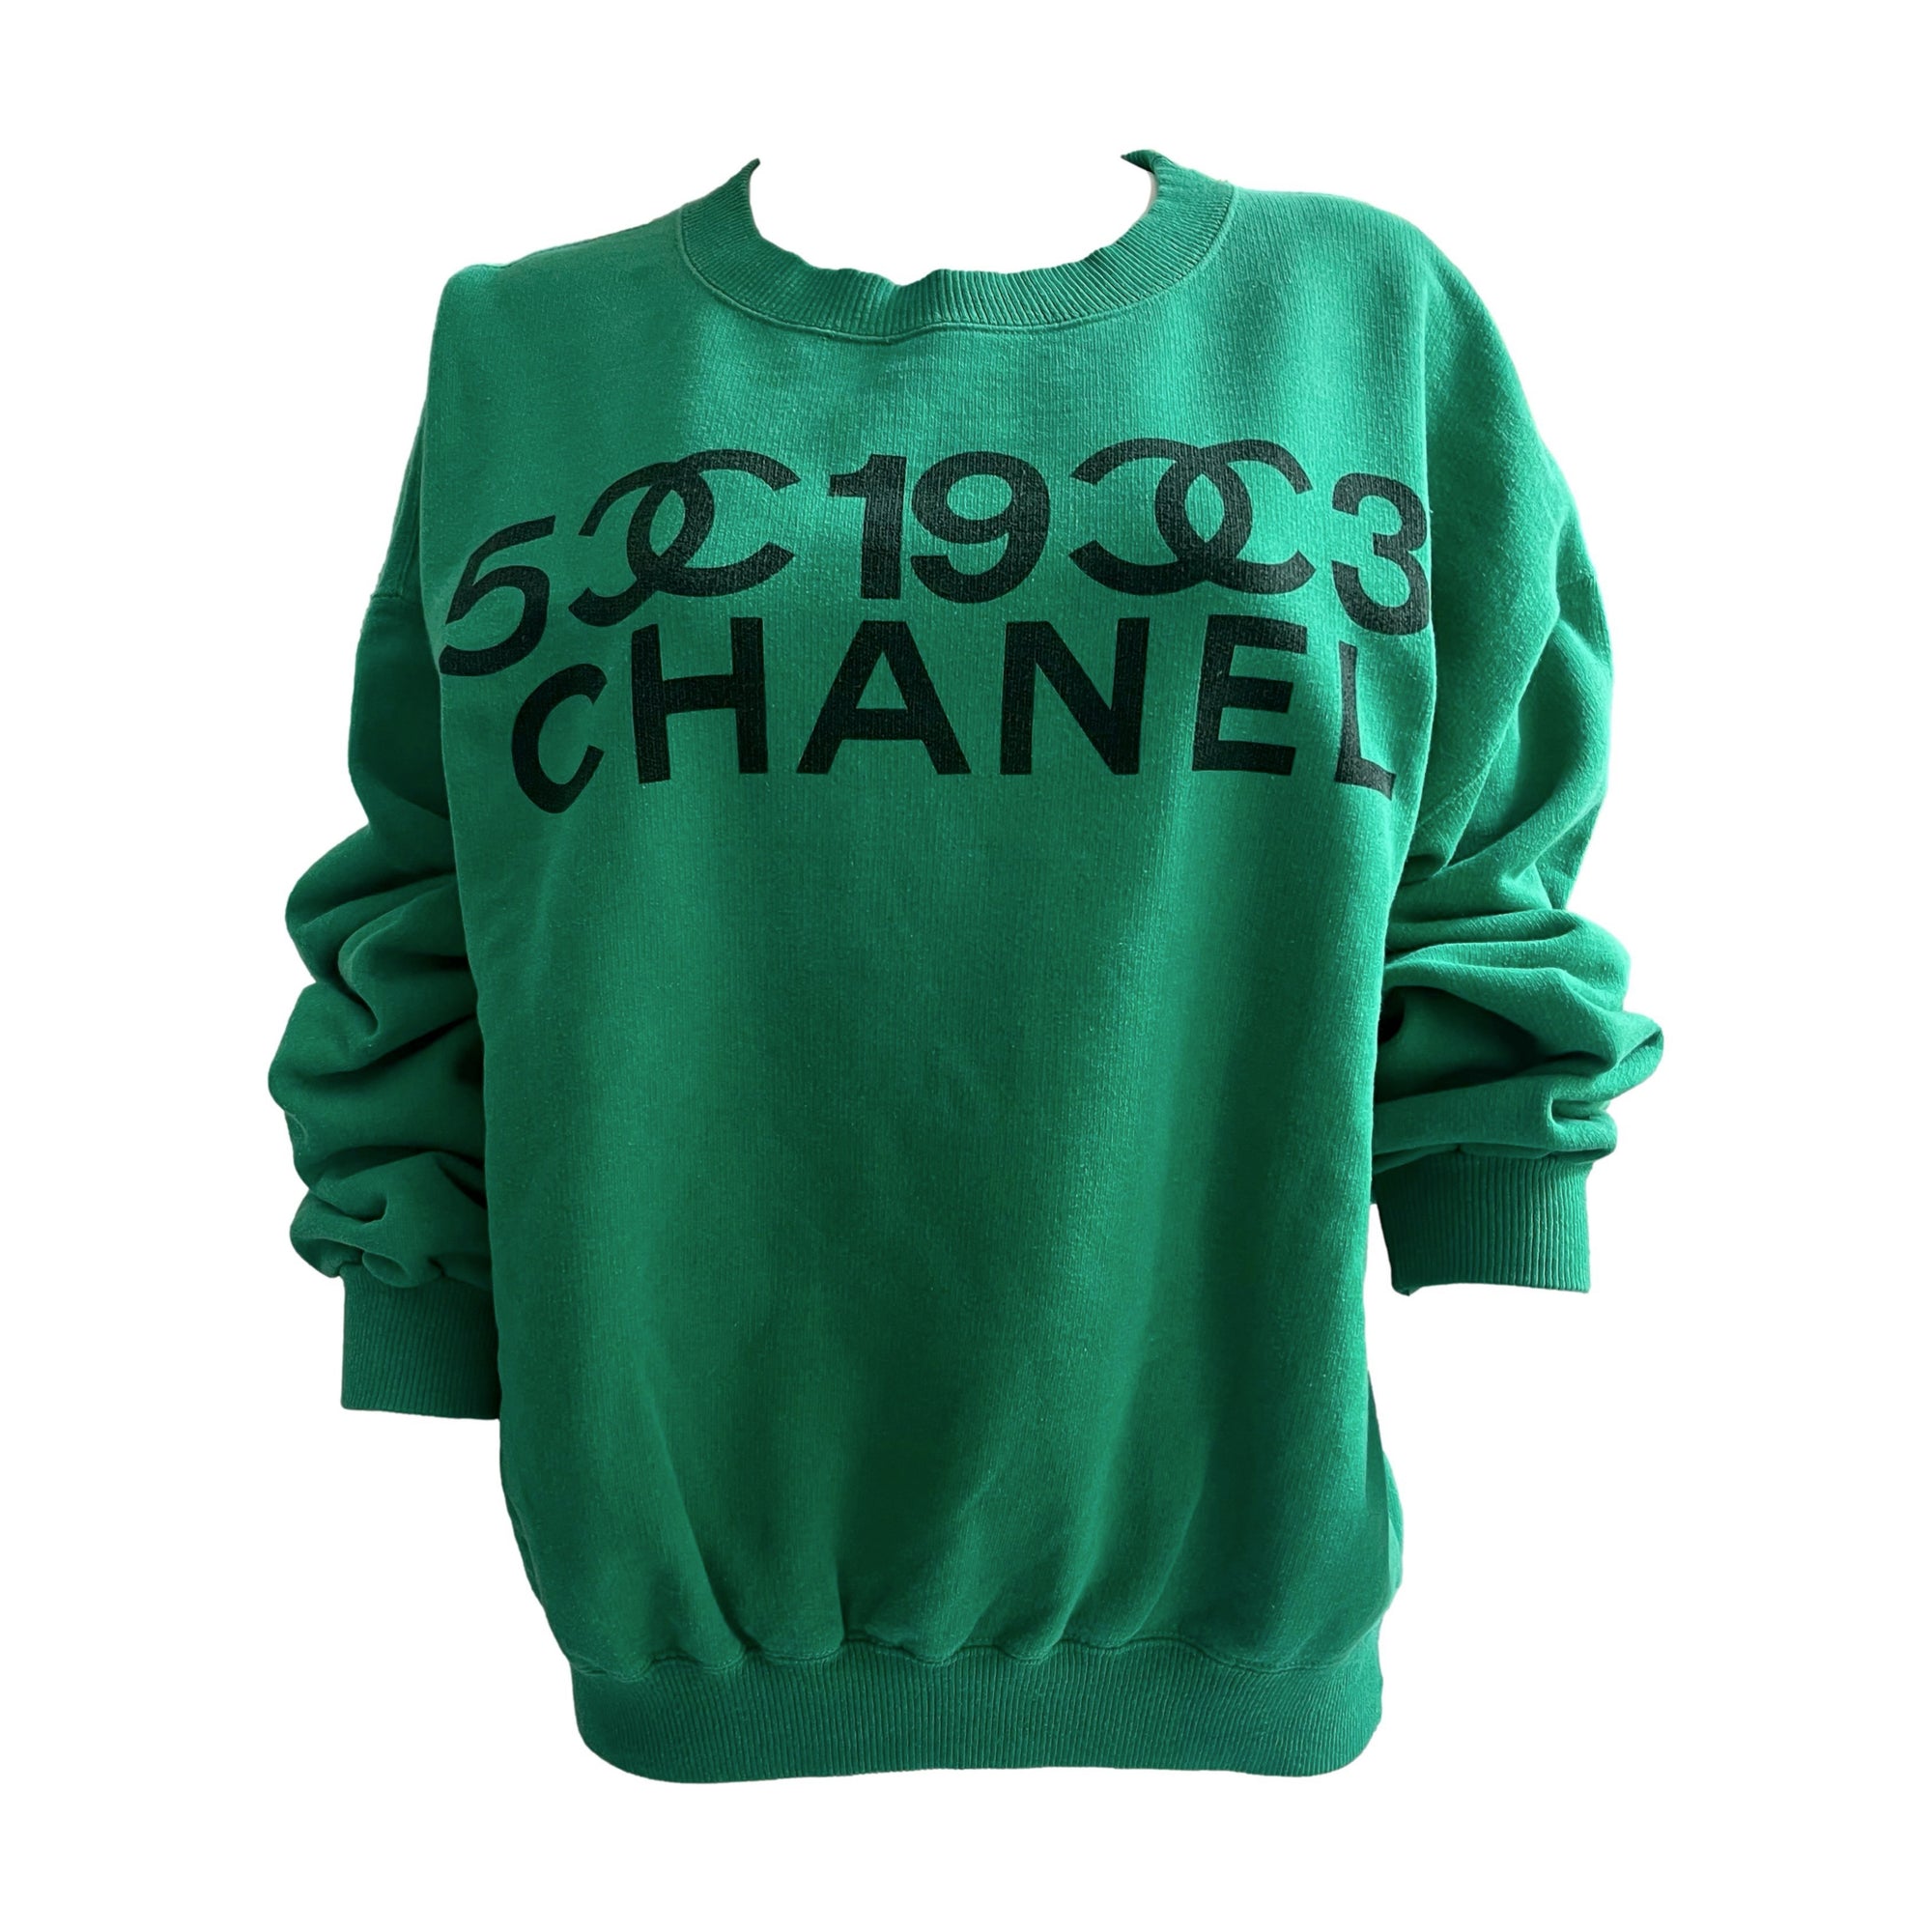 Coco Chanel Logo Pink Youth Hoodie 